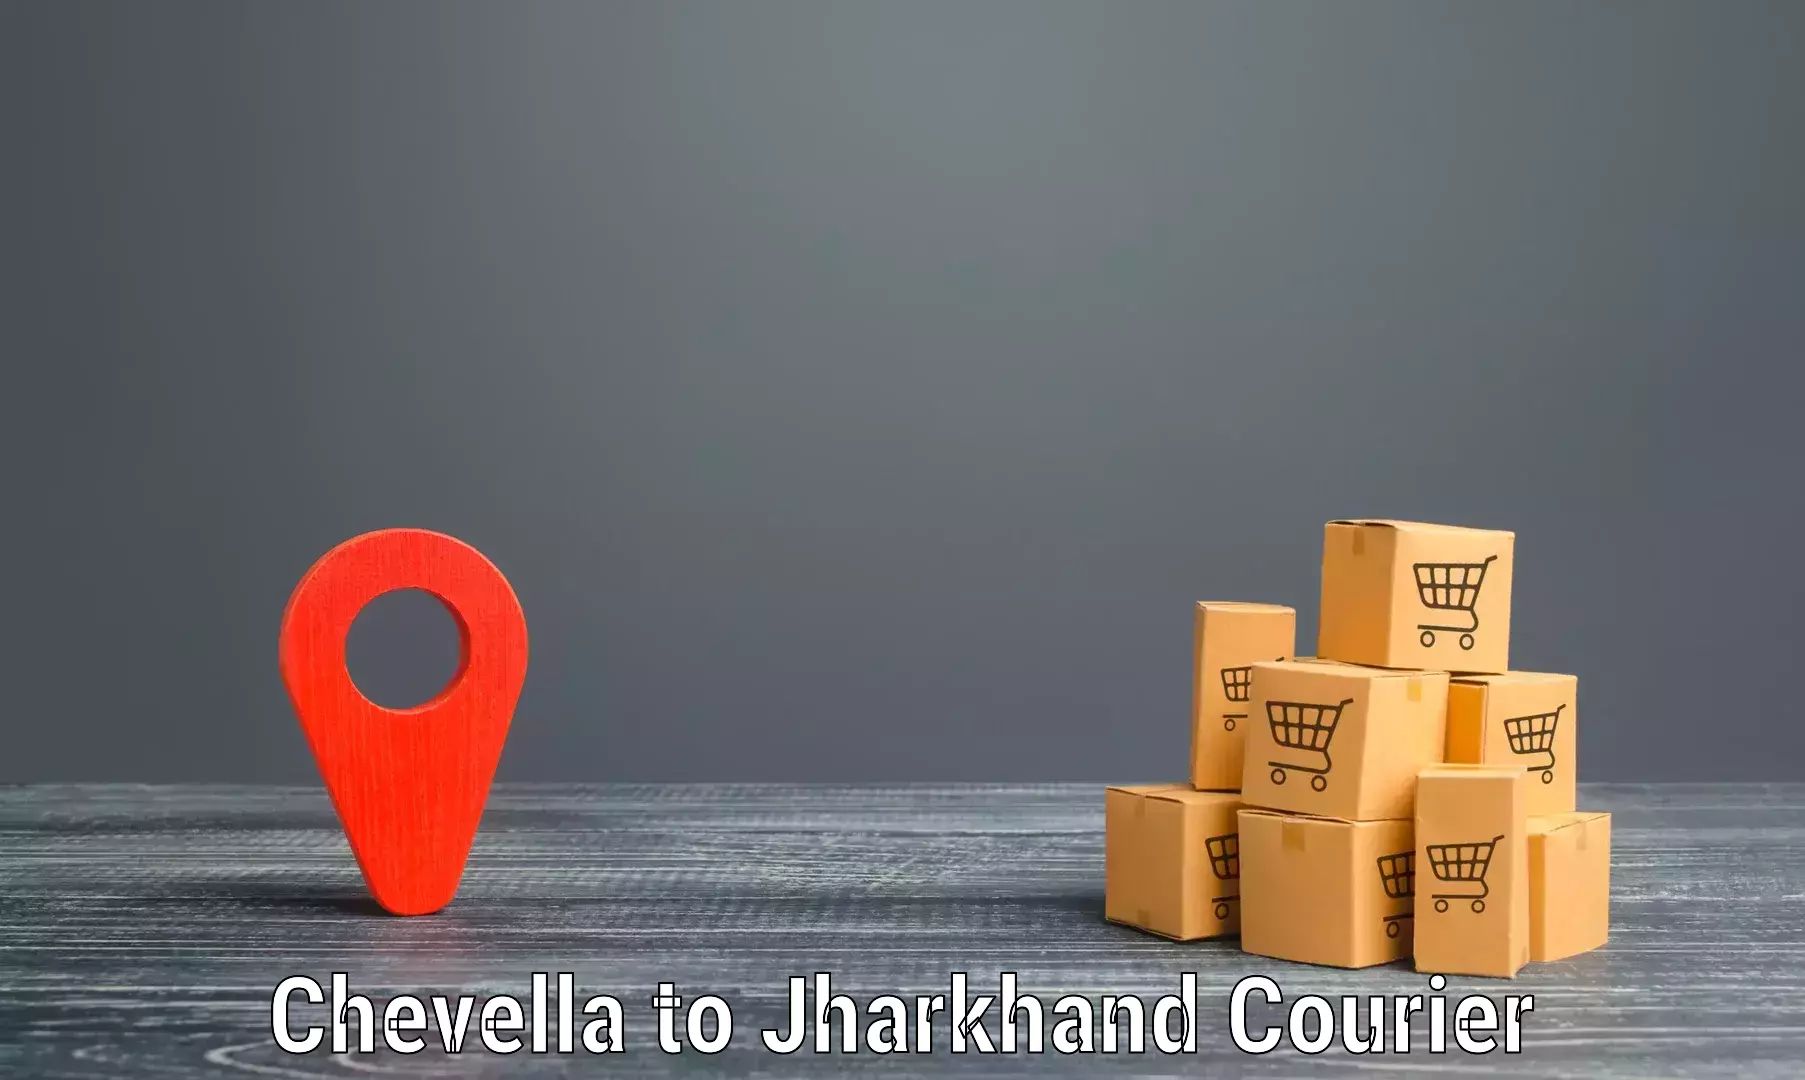 Express mail service Chevella to Jamshedpur